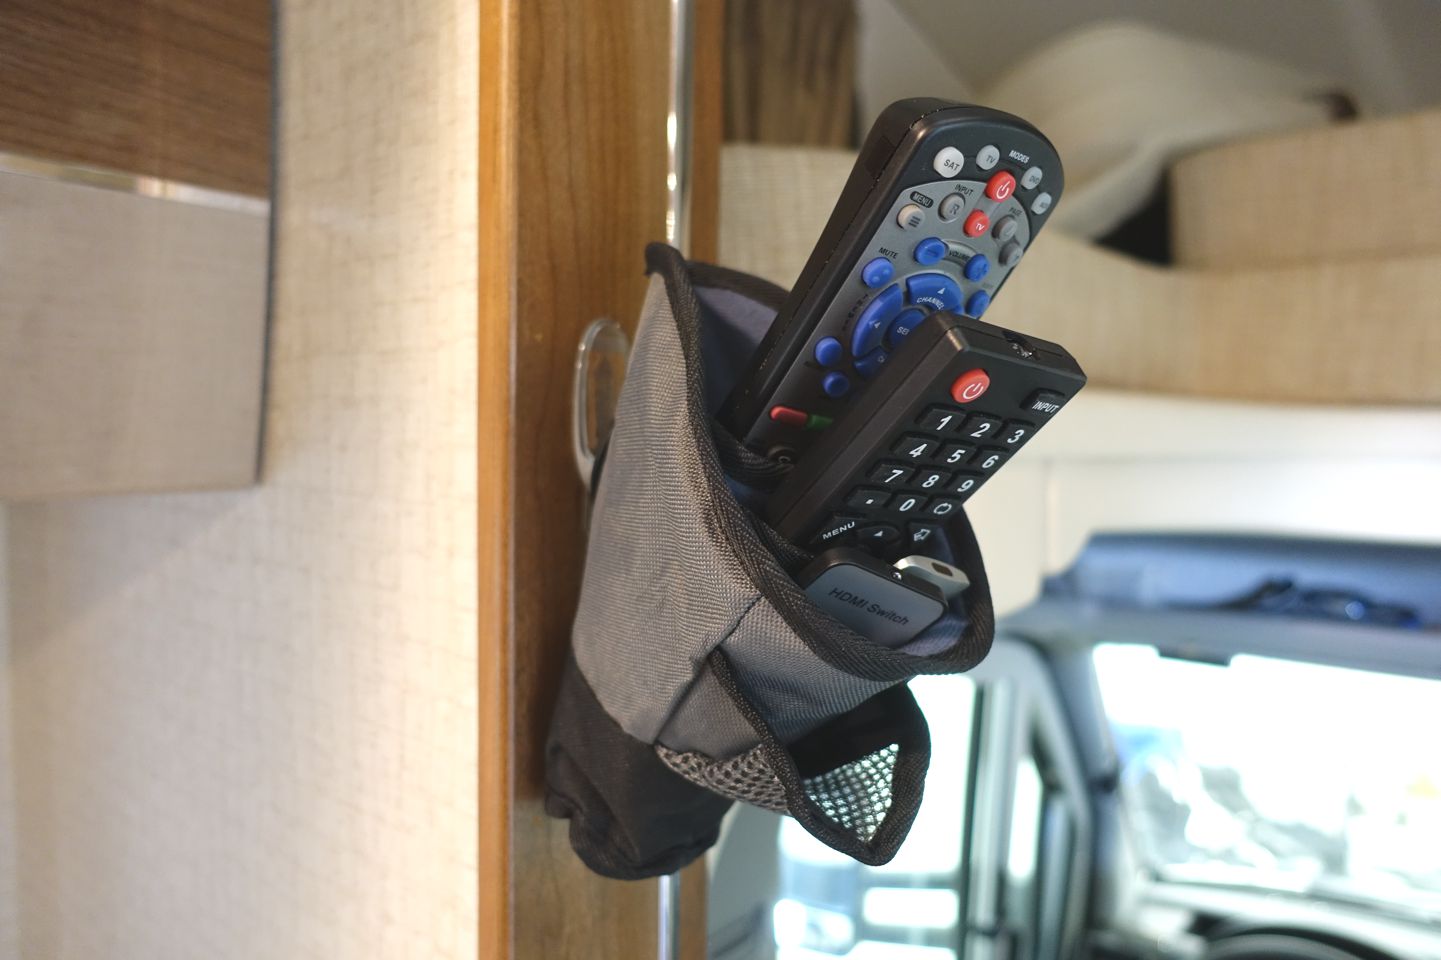 Remotes in a pouch hanging from the wall.